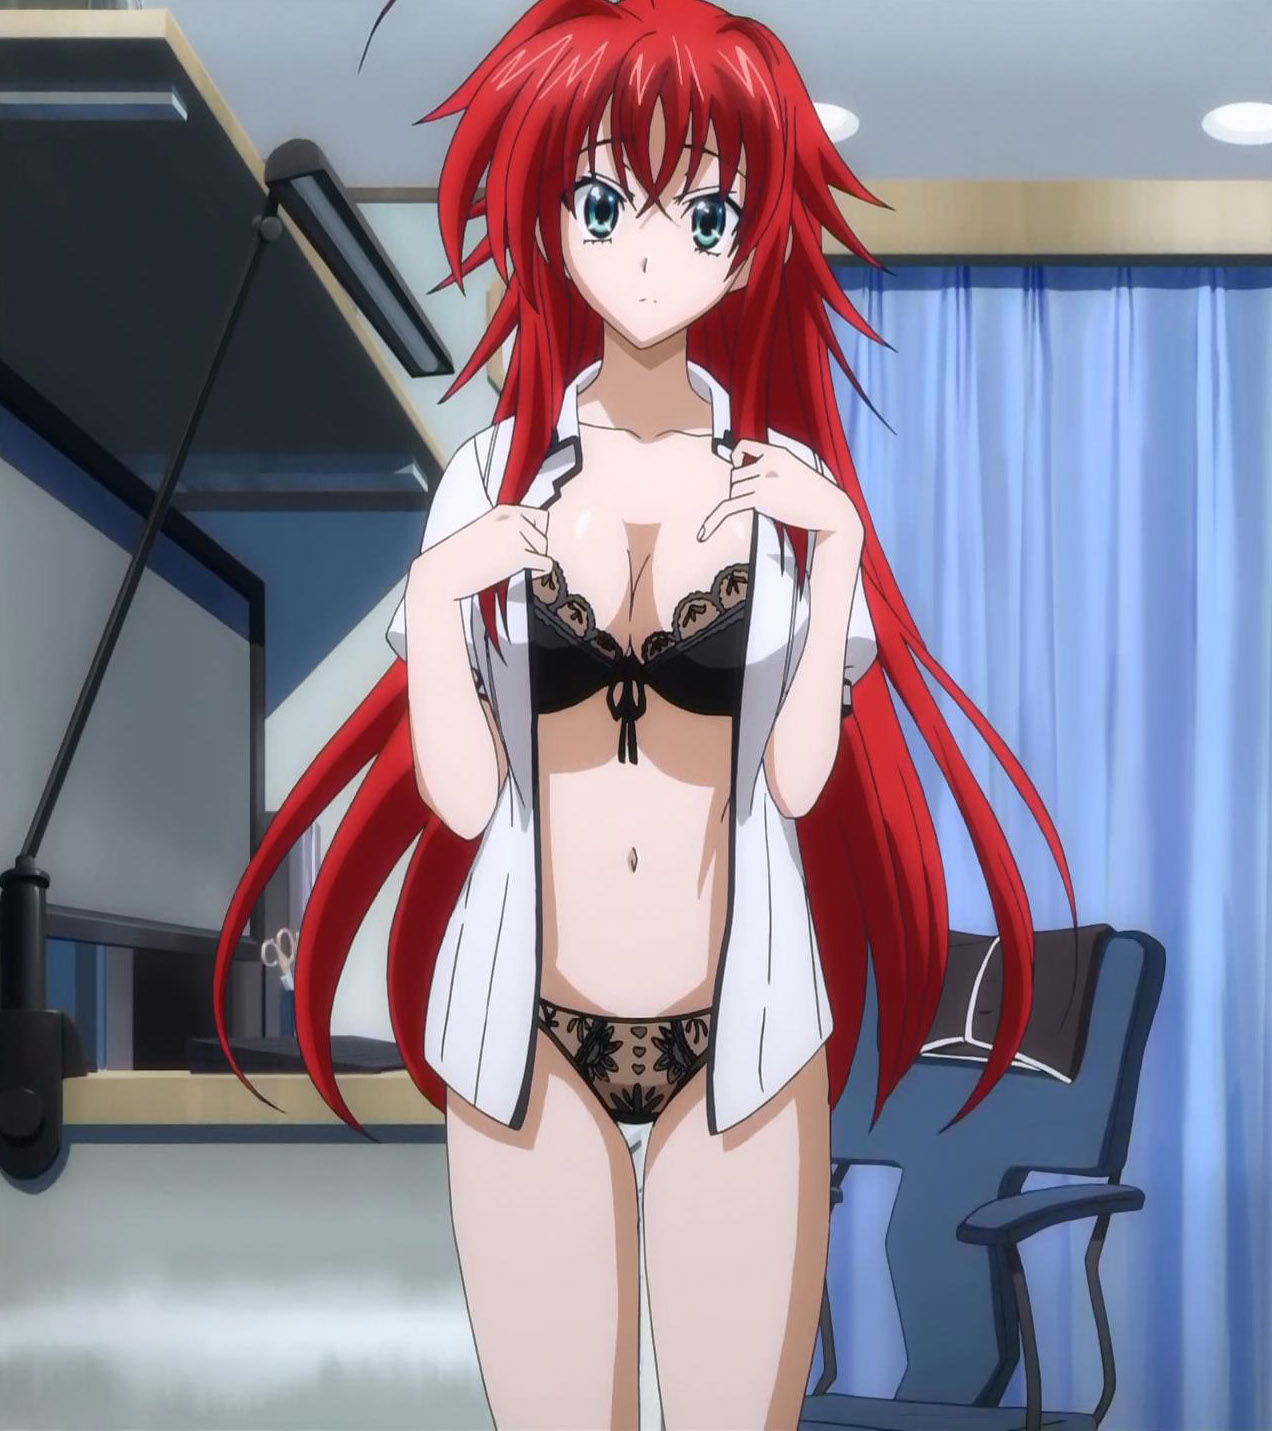 Hot Chapters of Highschool DXD: A New Opportunity - Dreame